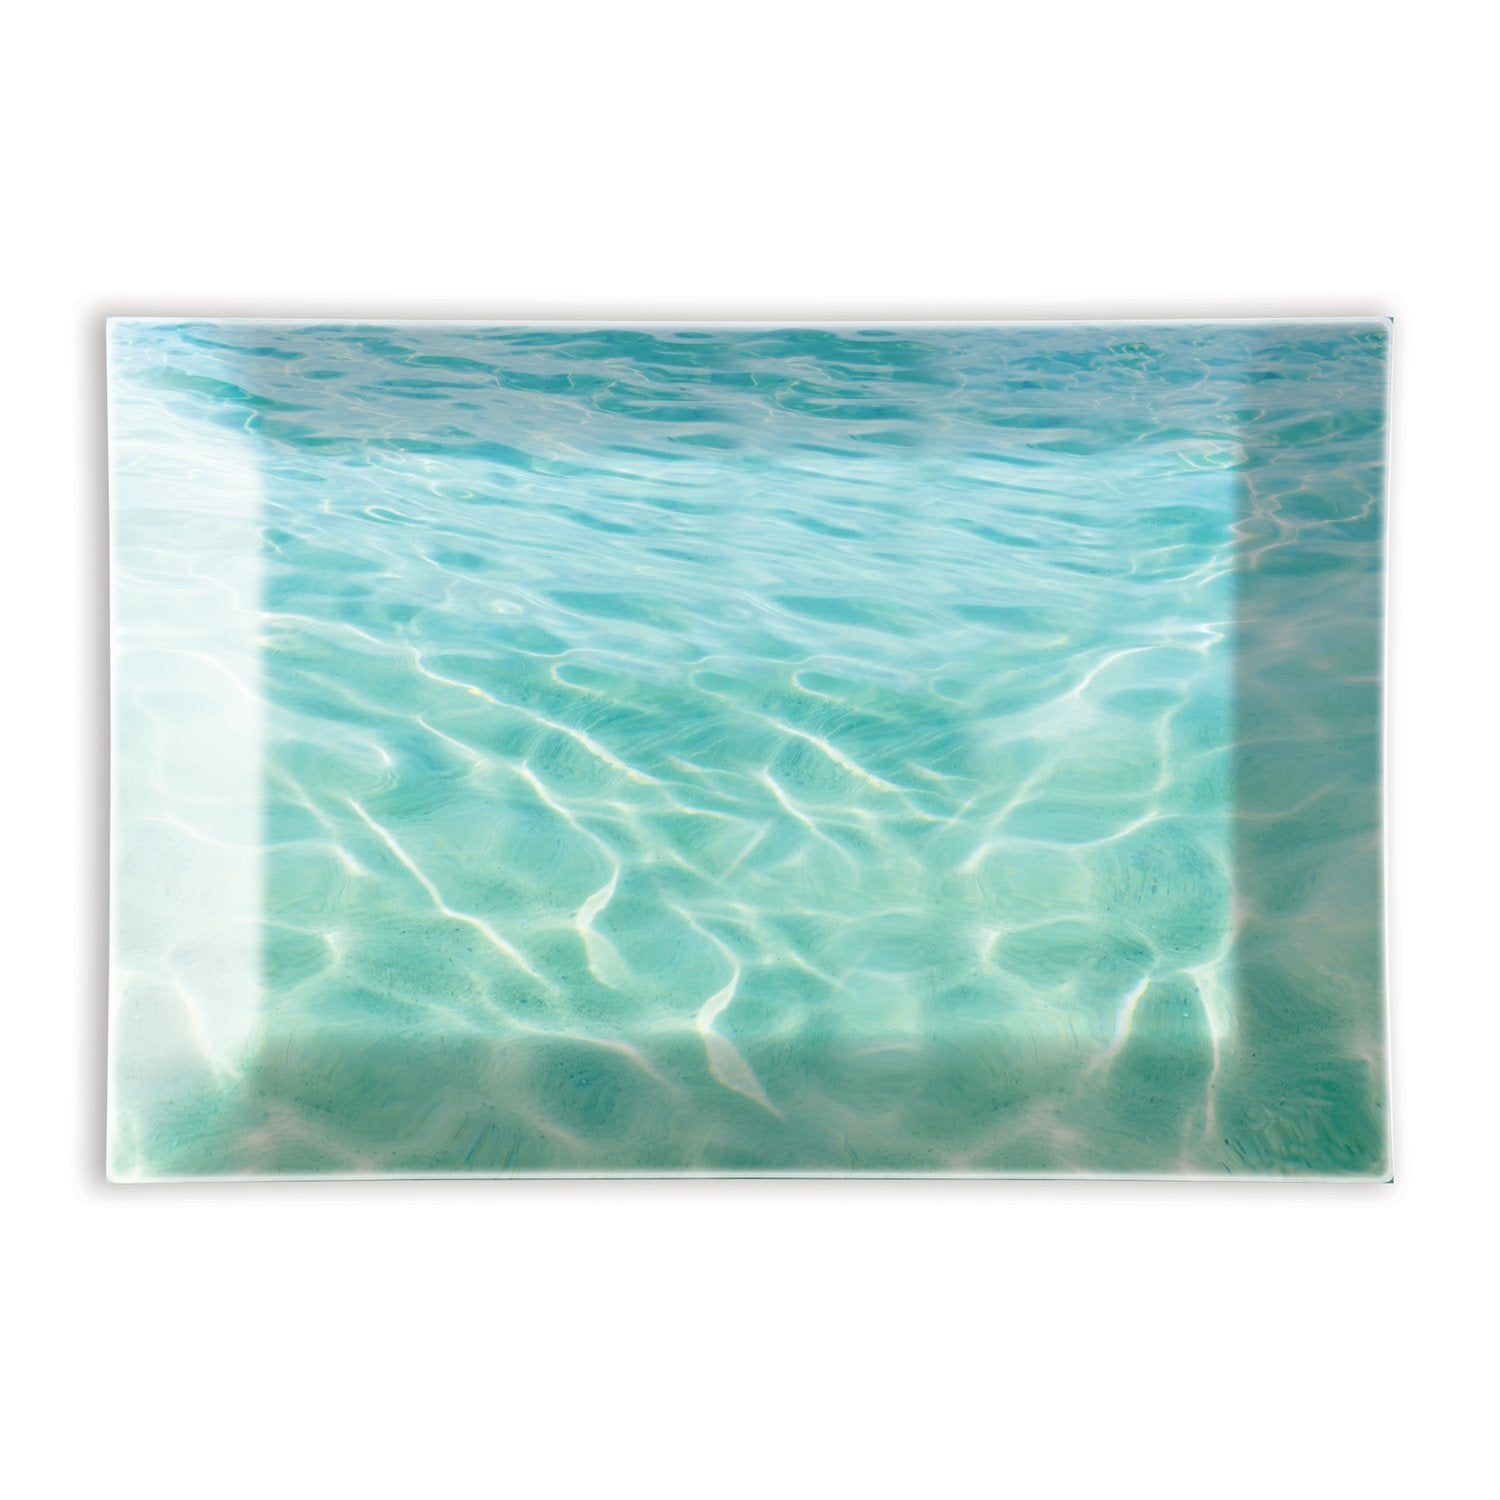 BEACH RECTANGULAR GLASS SOAP DISH GSDR189 - Molly's! A Chic and Unique Boutique 